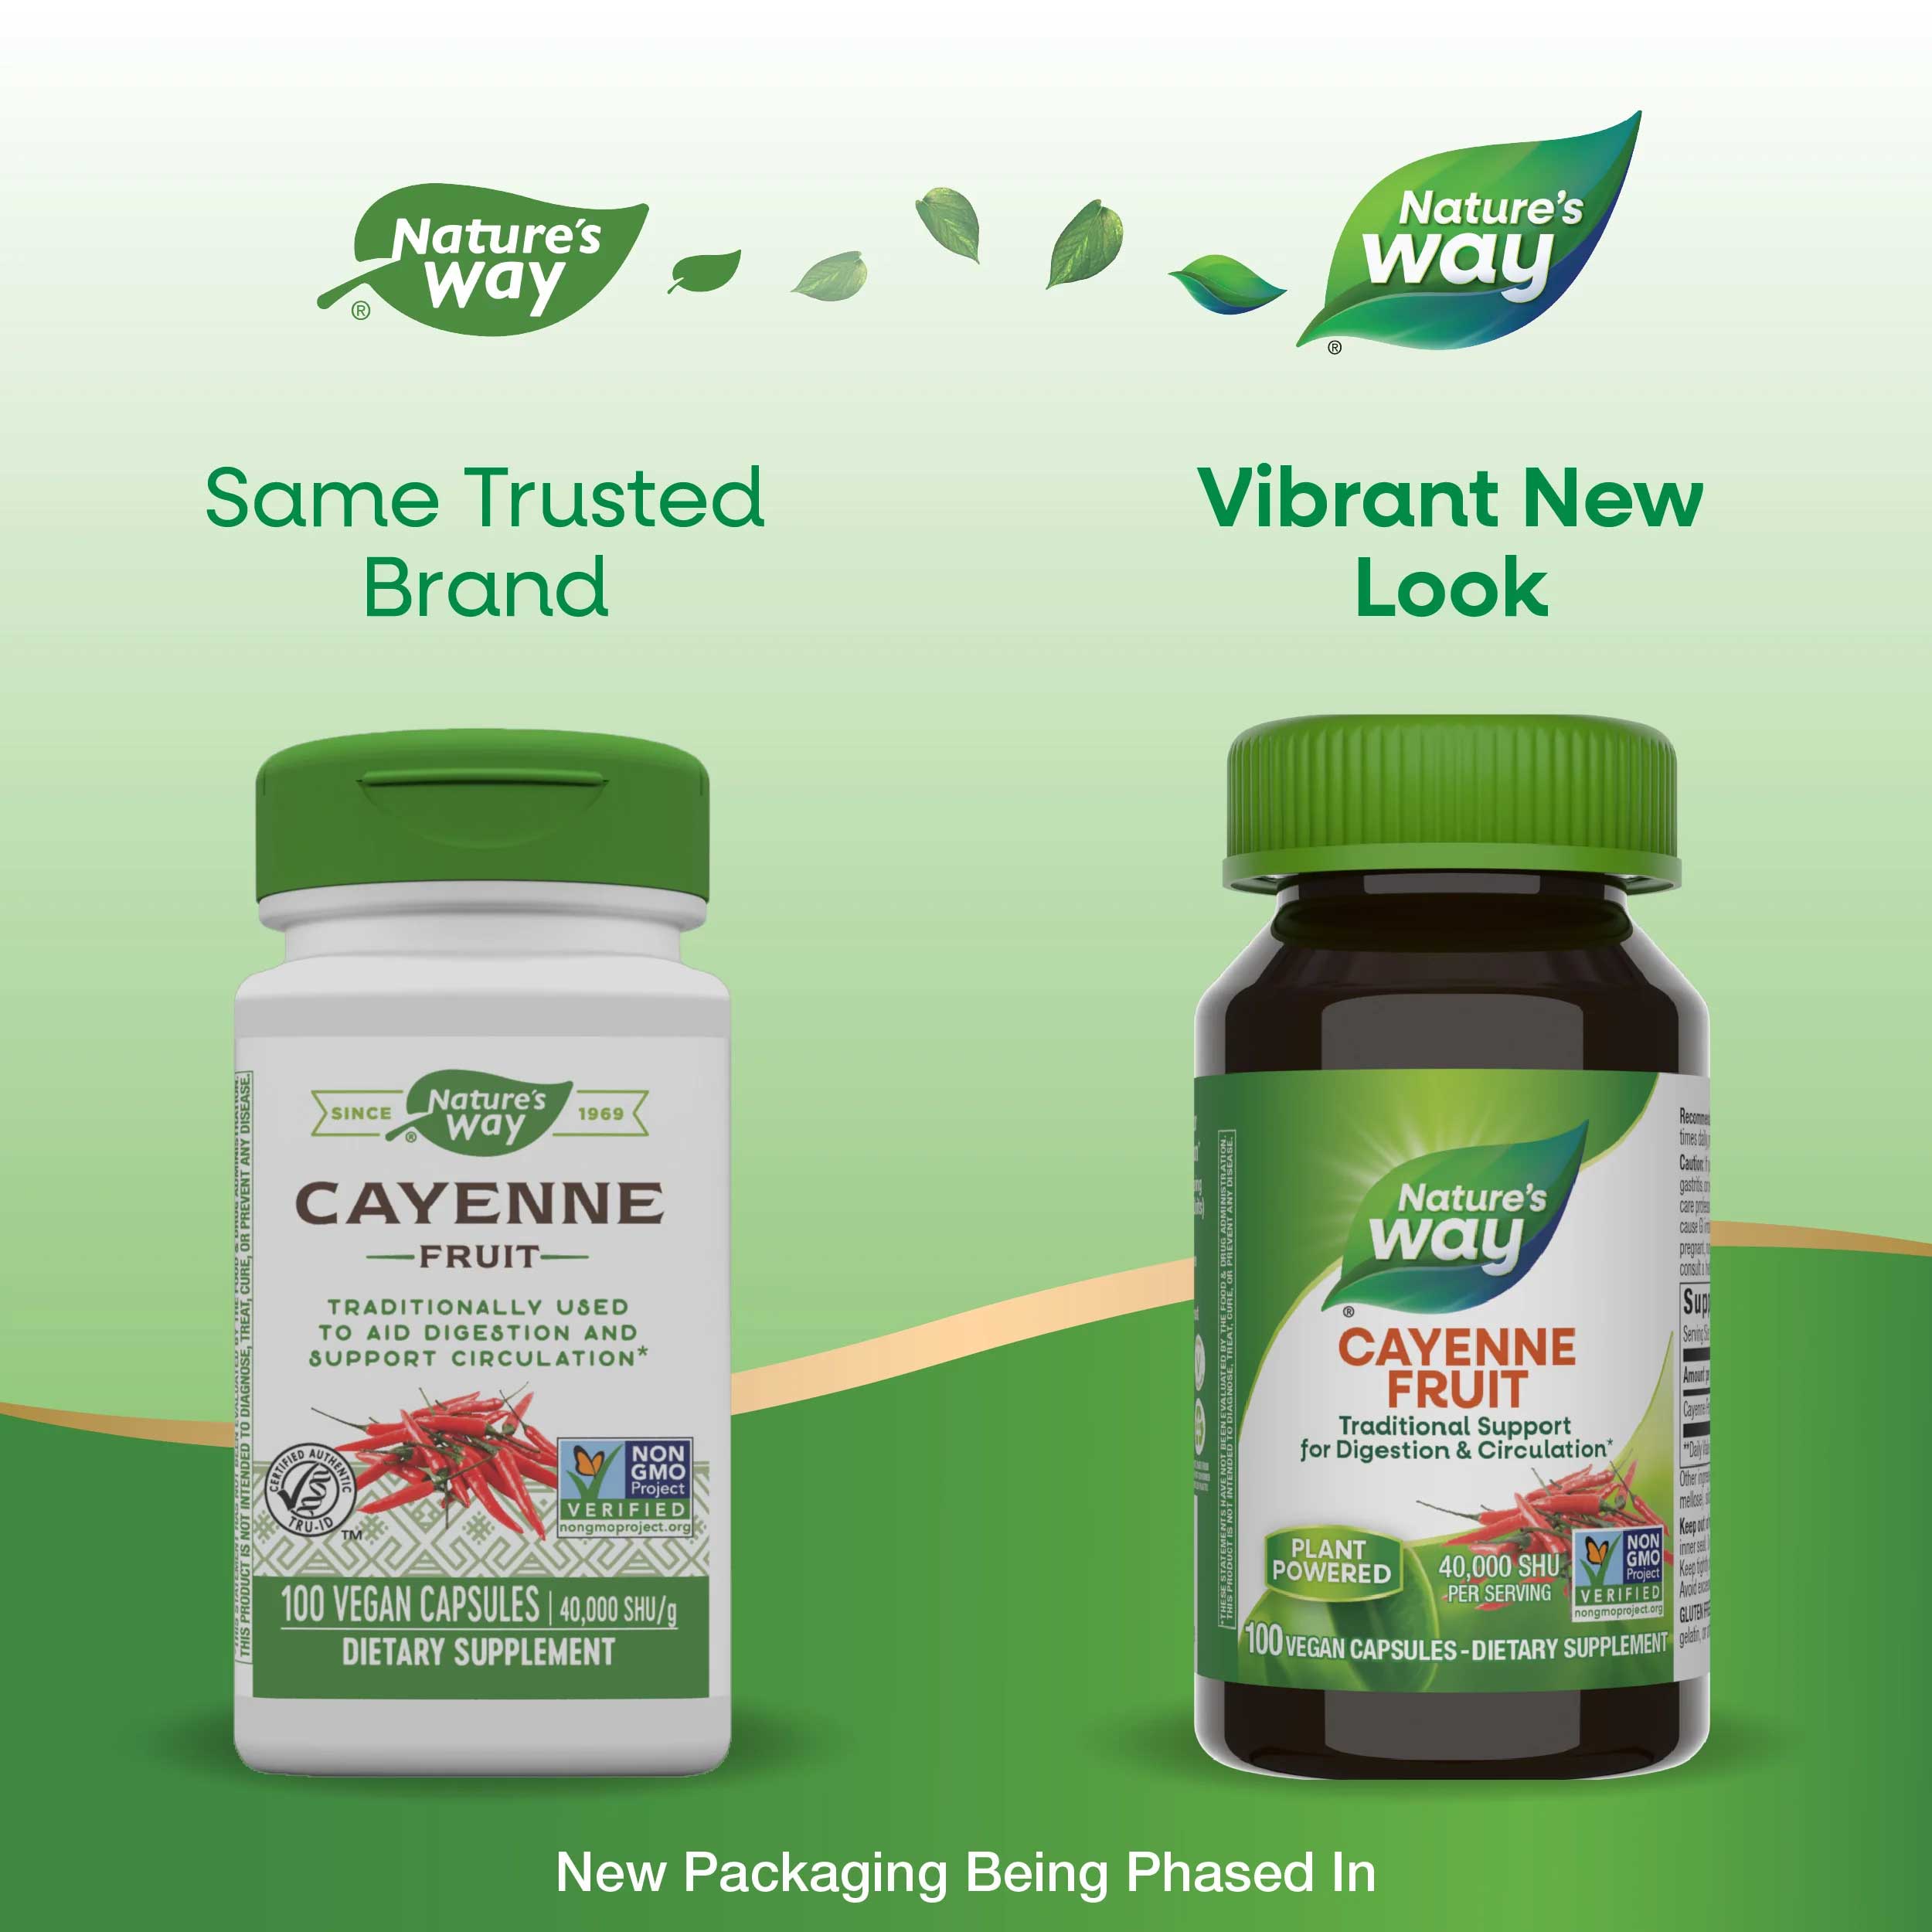 Nature's Way Cayenne Fruit New Look